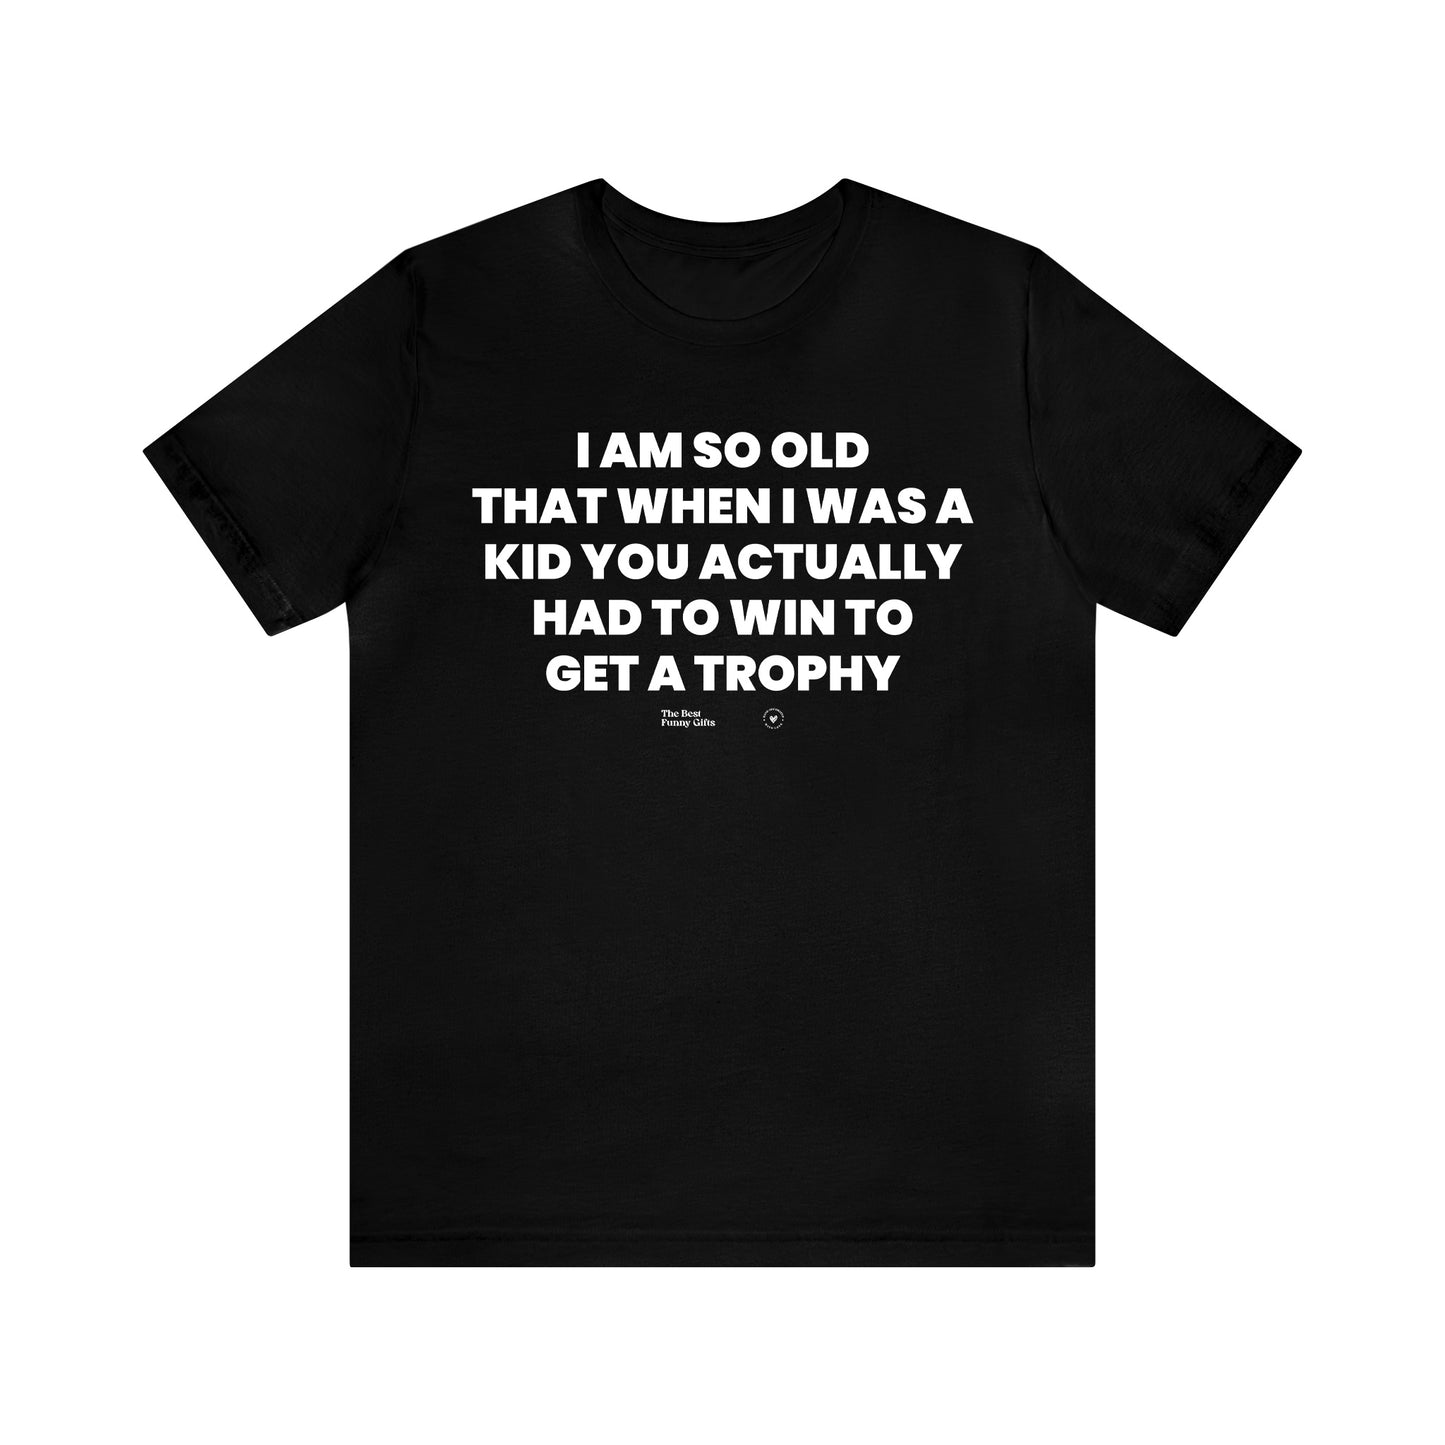 Mens T Shirts - I Am So Old That When I Was a Kid You Actually Had to Win to Get a Trophy - Funny Men T Shirts